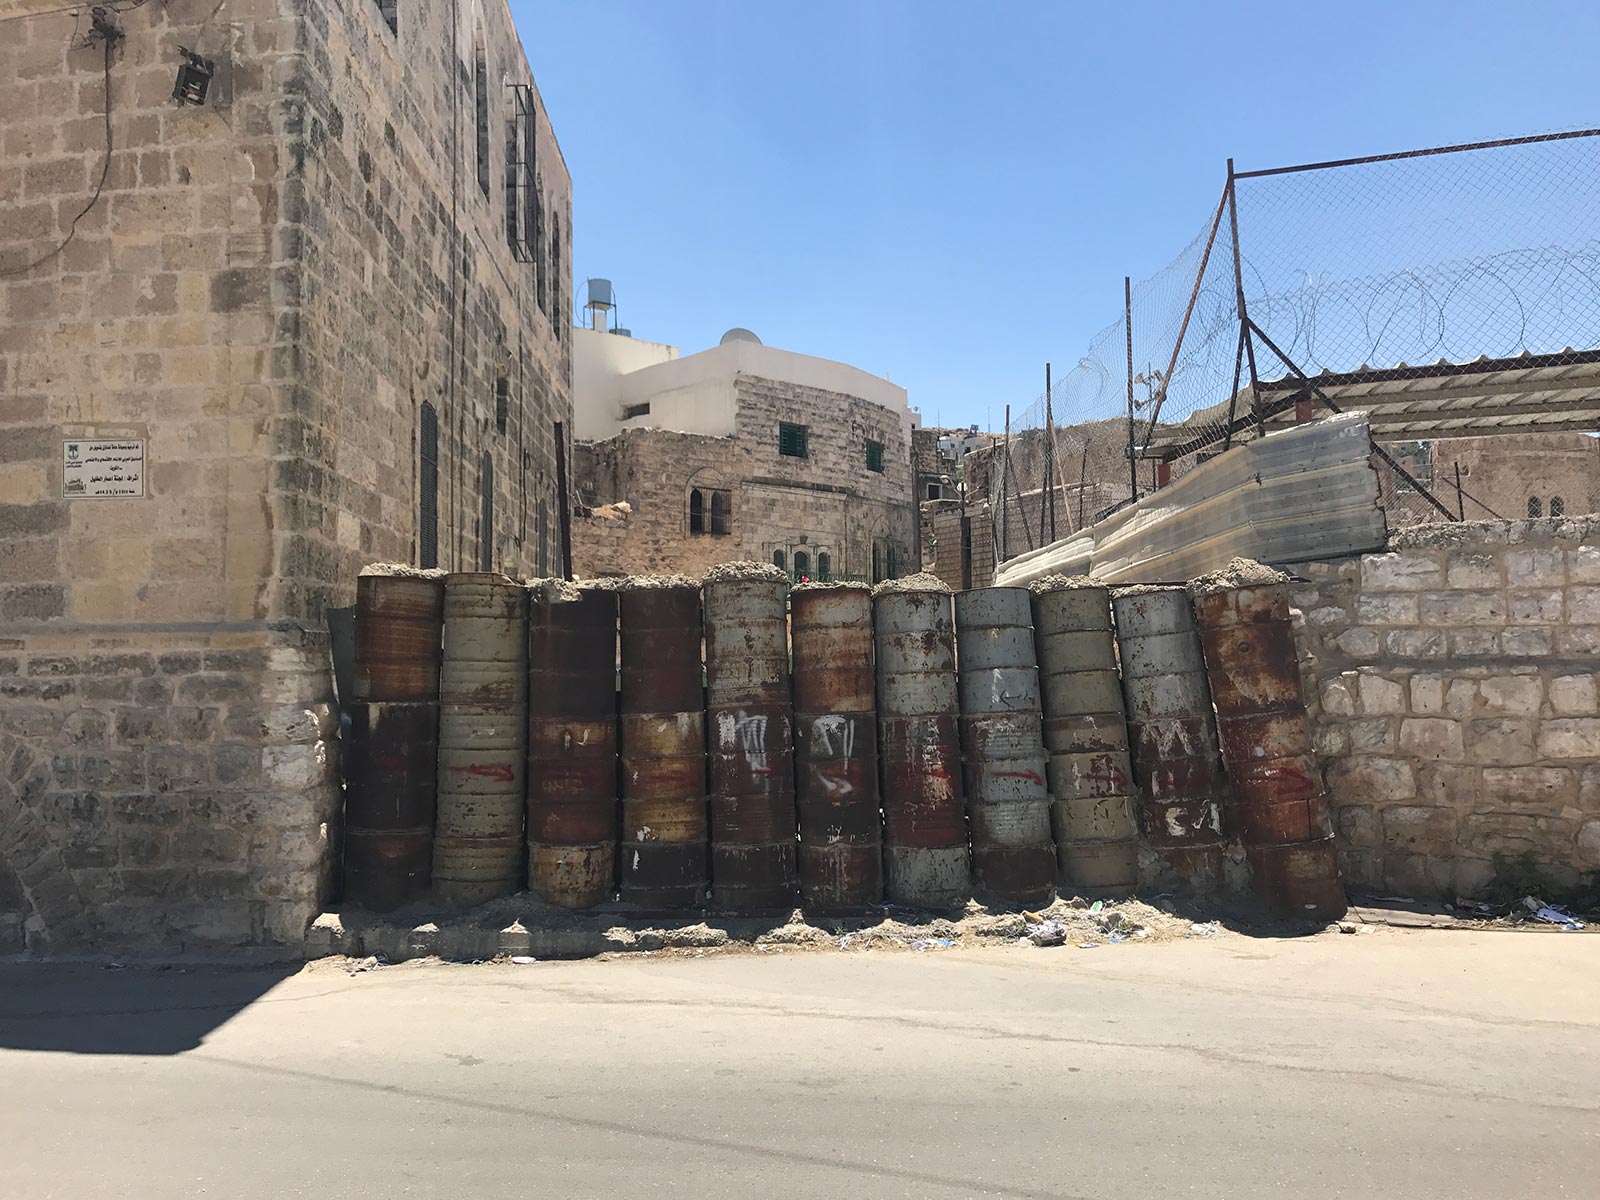 Barrel wall at Palestine in Jerusalem, Israel. My time in Jerusalem, a special city divided